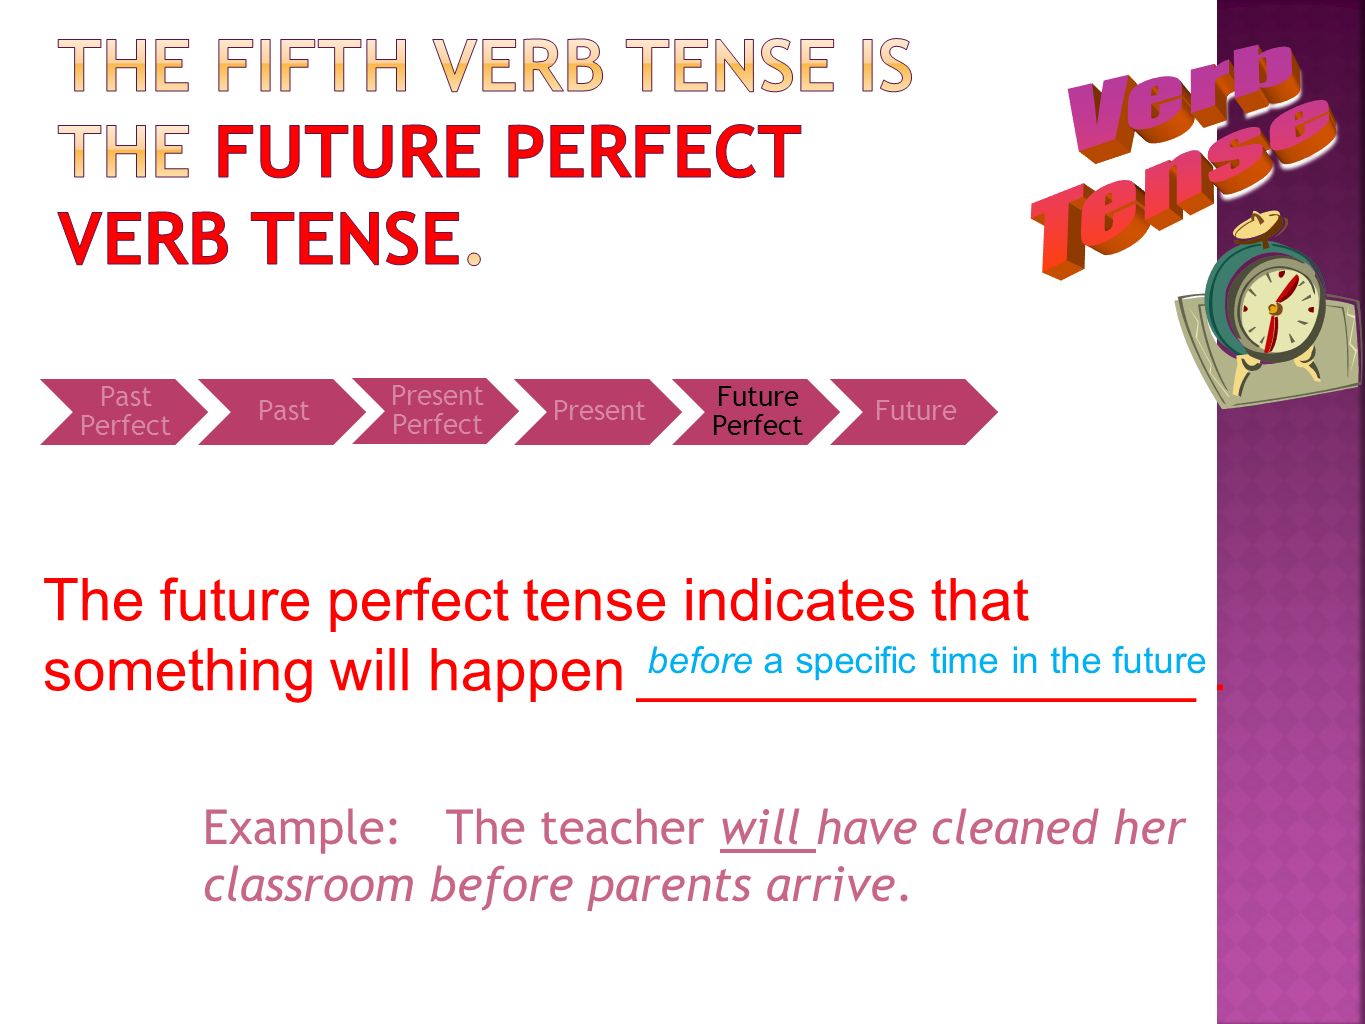 The fifth verb tense is the future perfect verb tense.